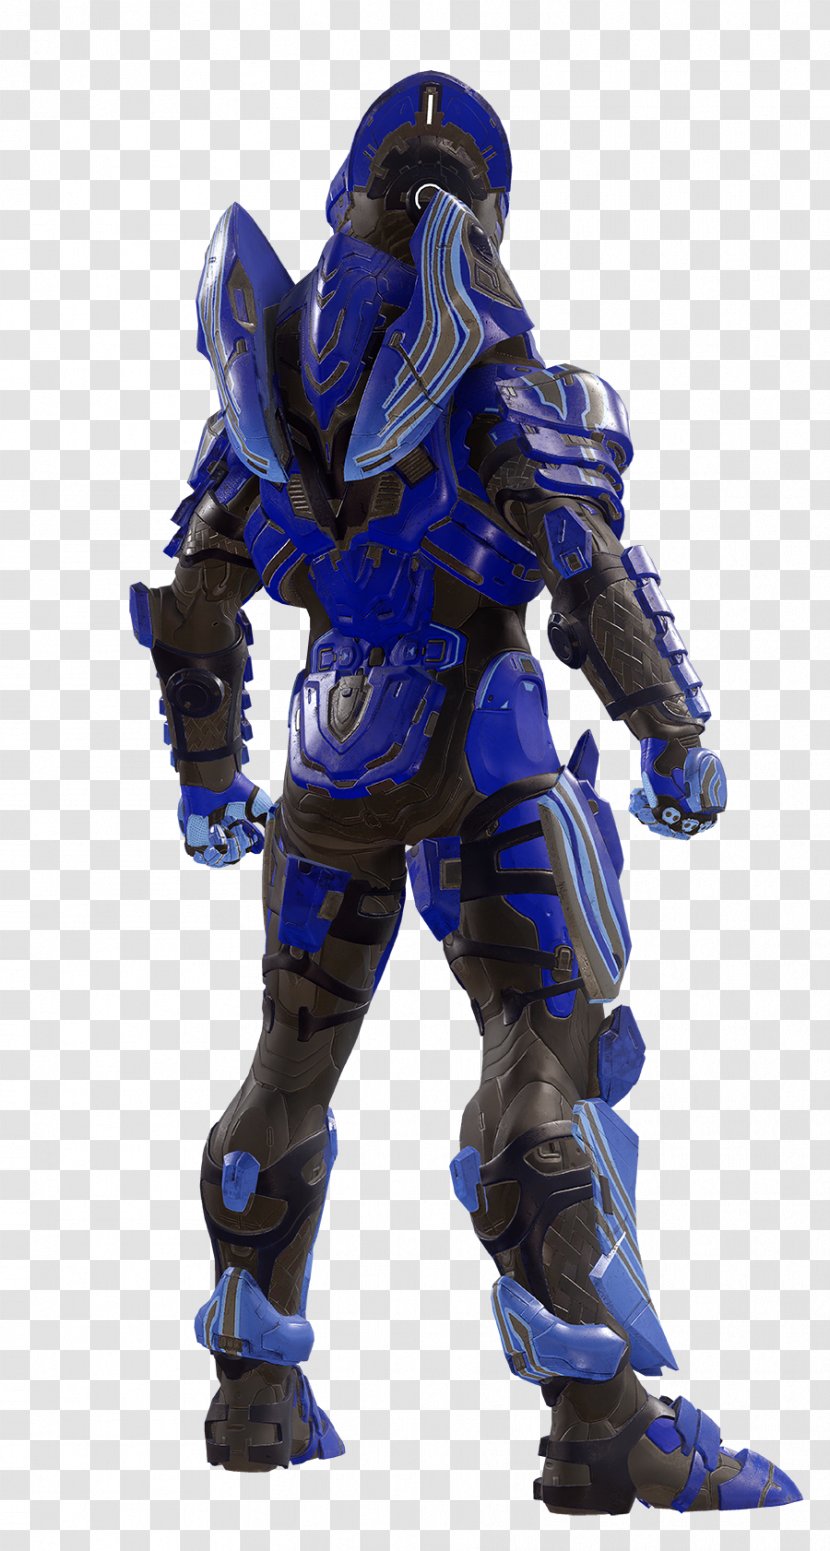 Halo 5: Guardians 4 Master Chief Video Game Spartan - Figurine - Glowing Transparent PNG